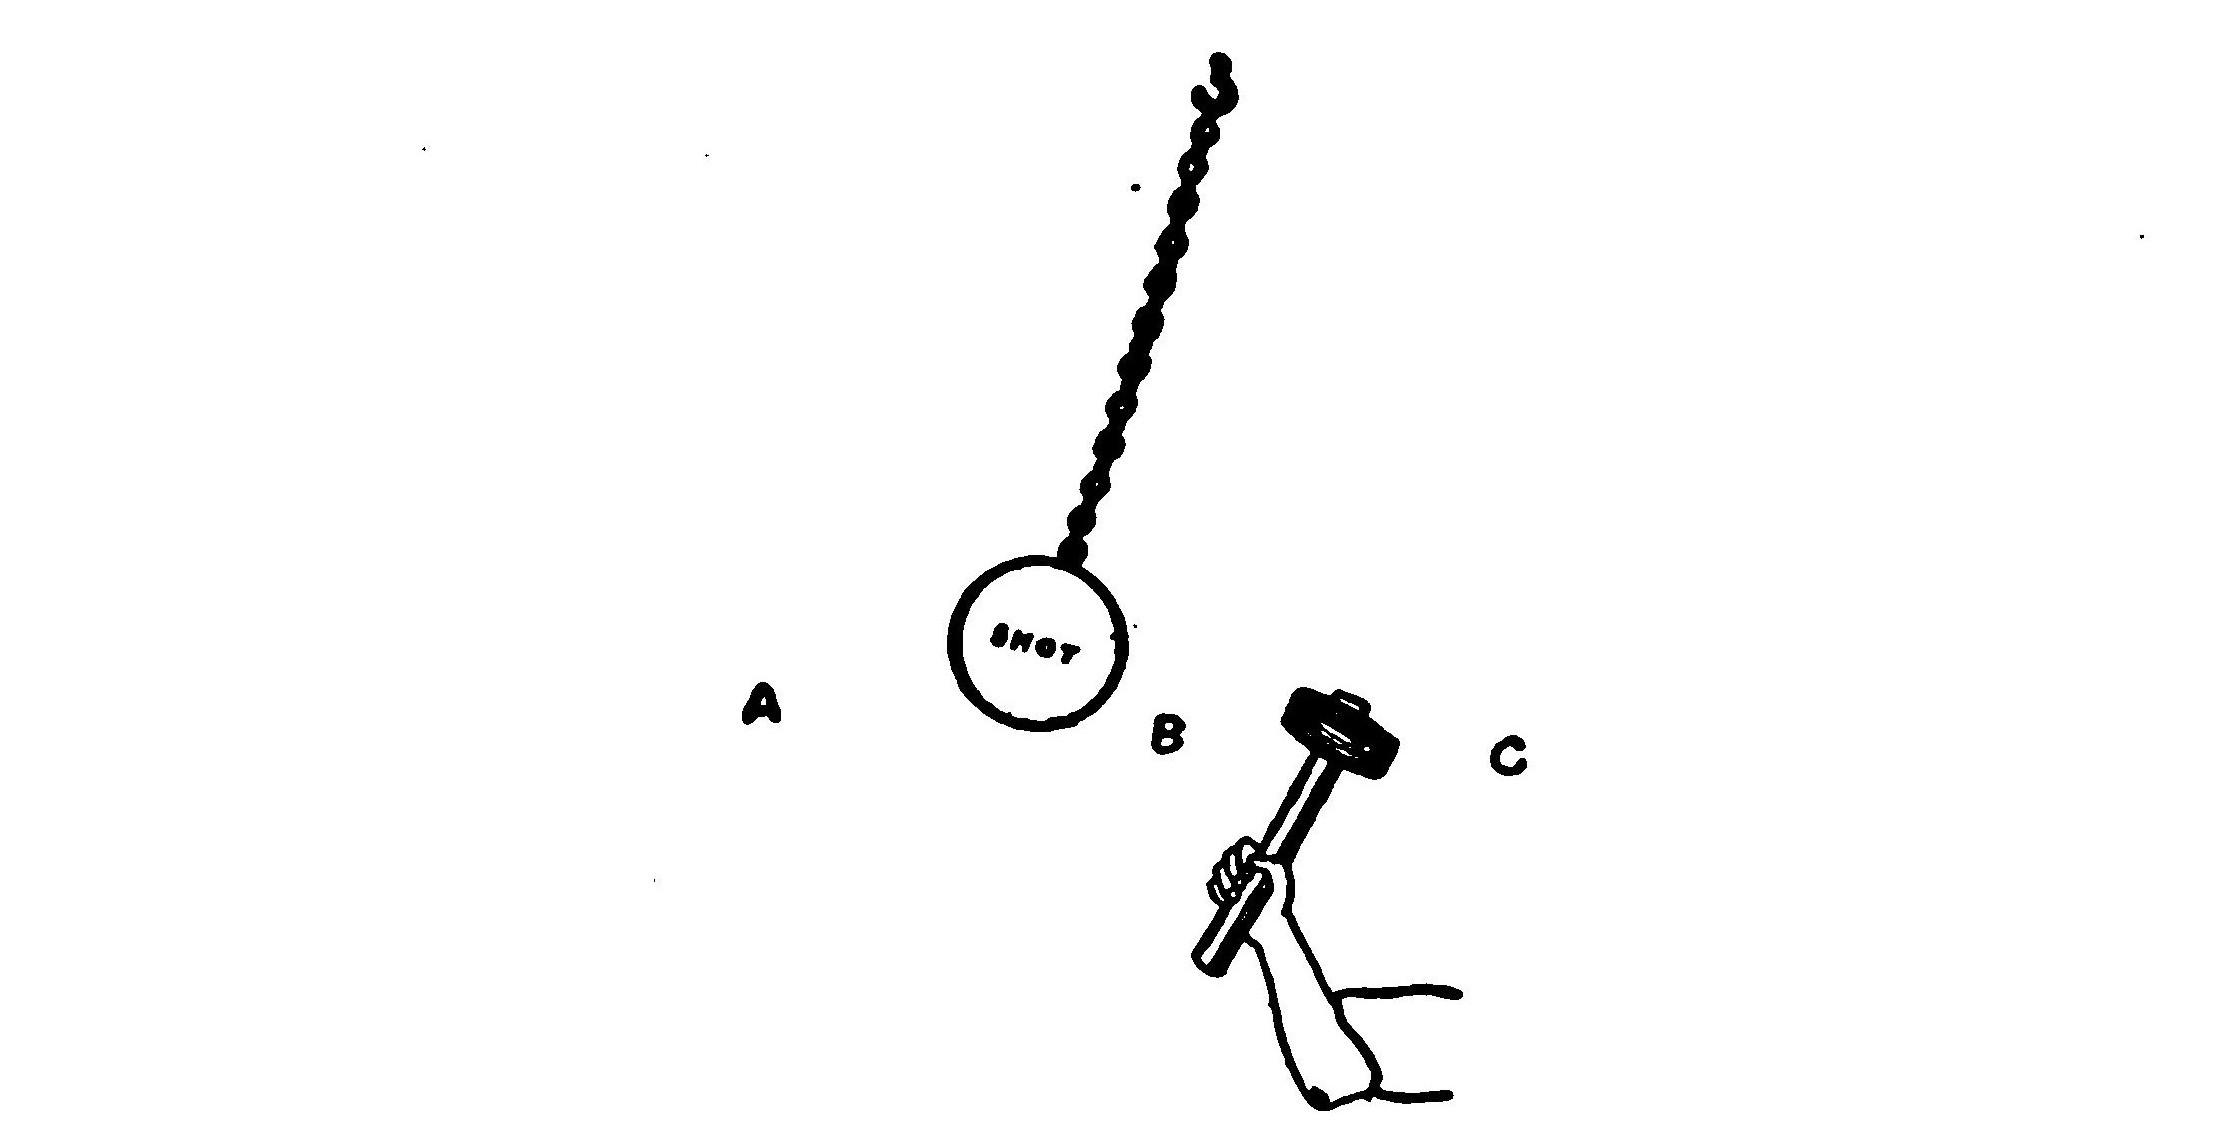 FIG. 86.—Chain and ball arranged to illustrate effect of tuning.